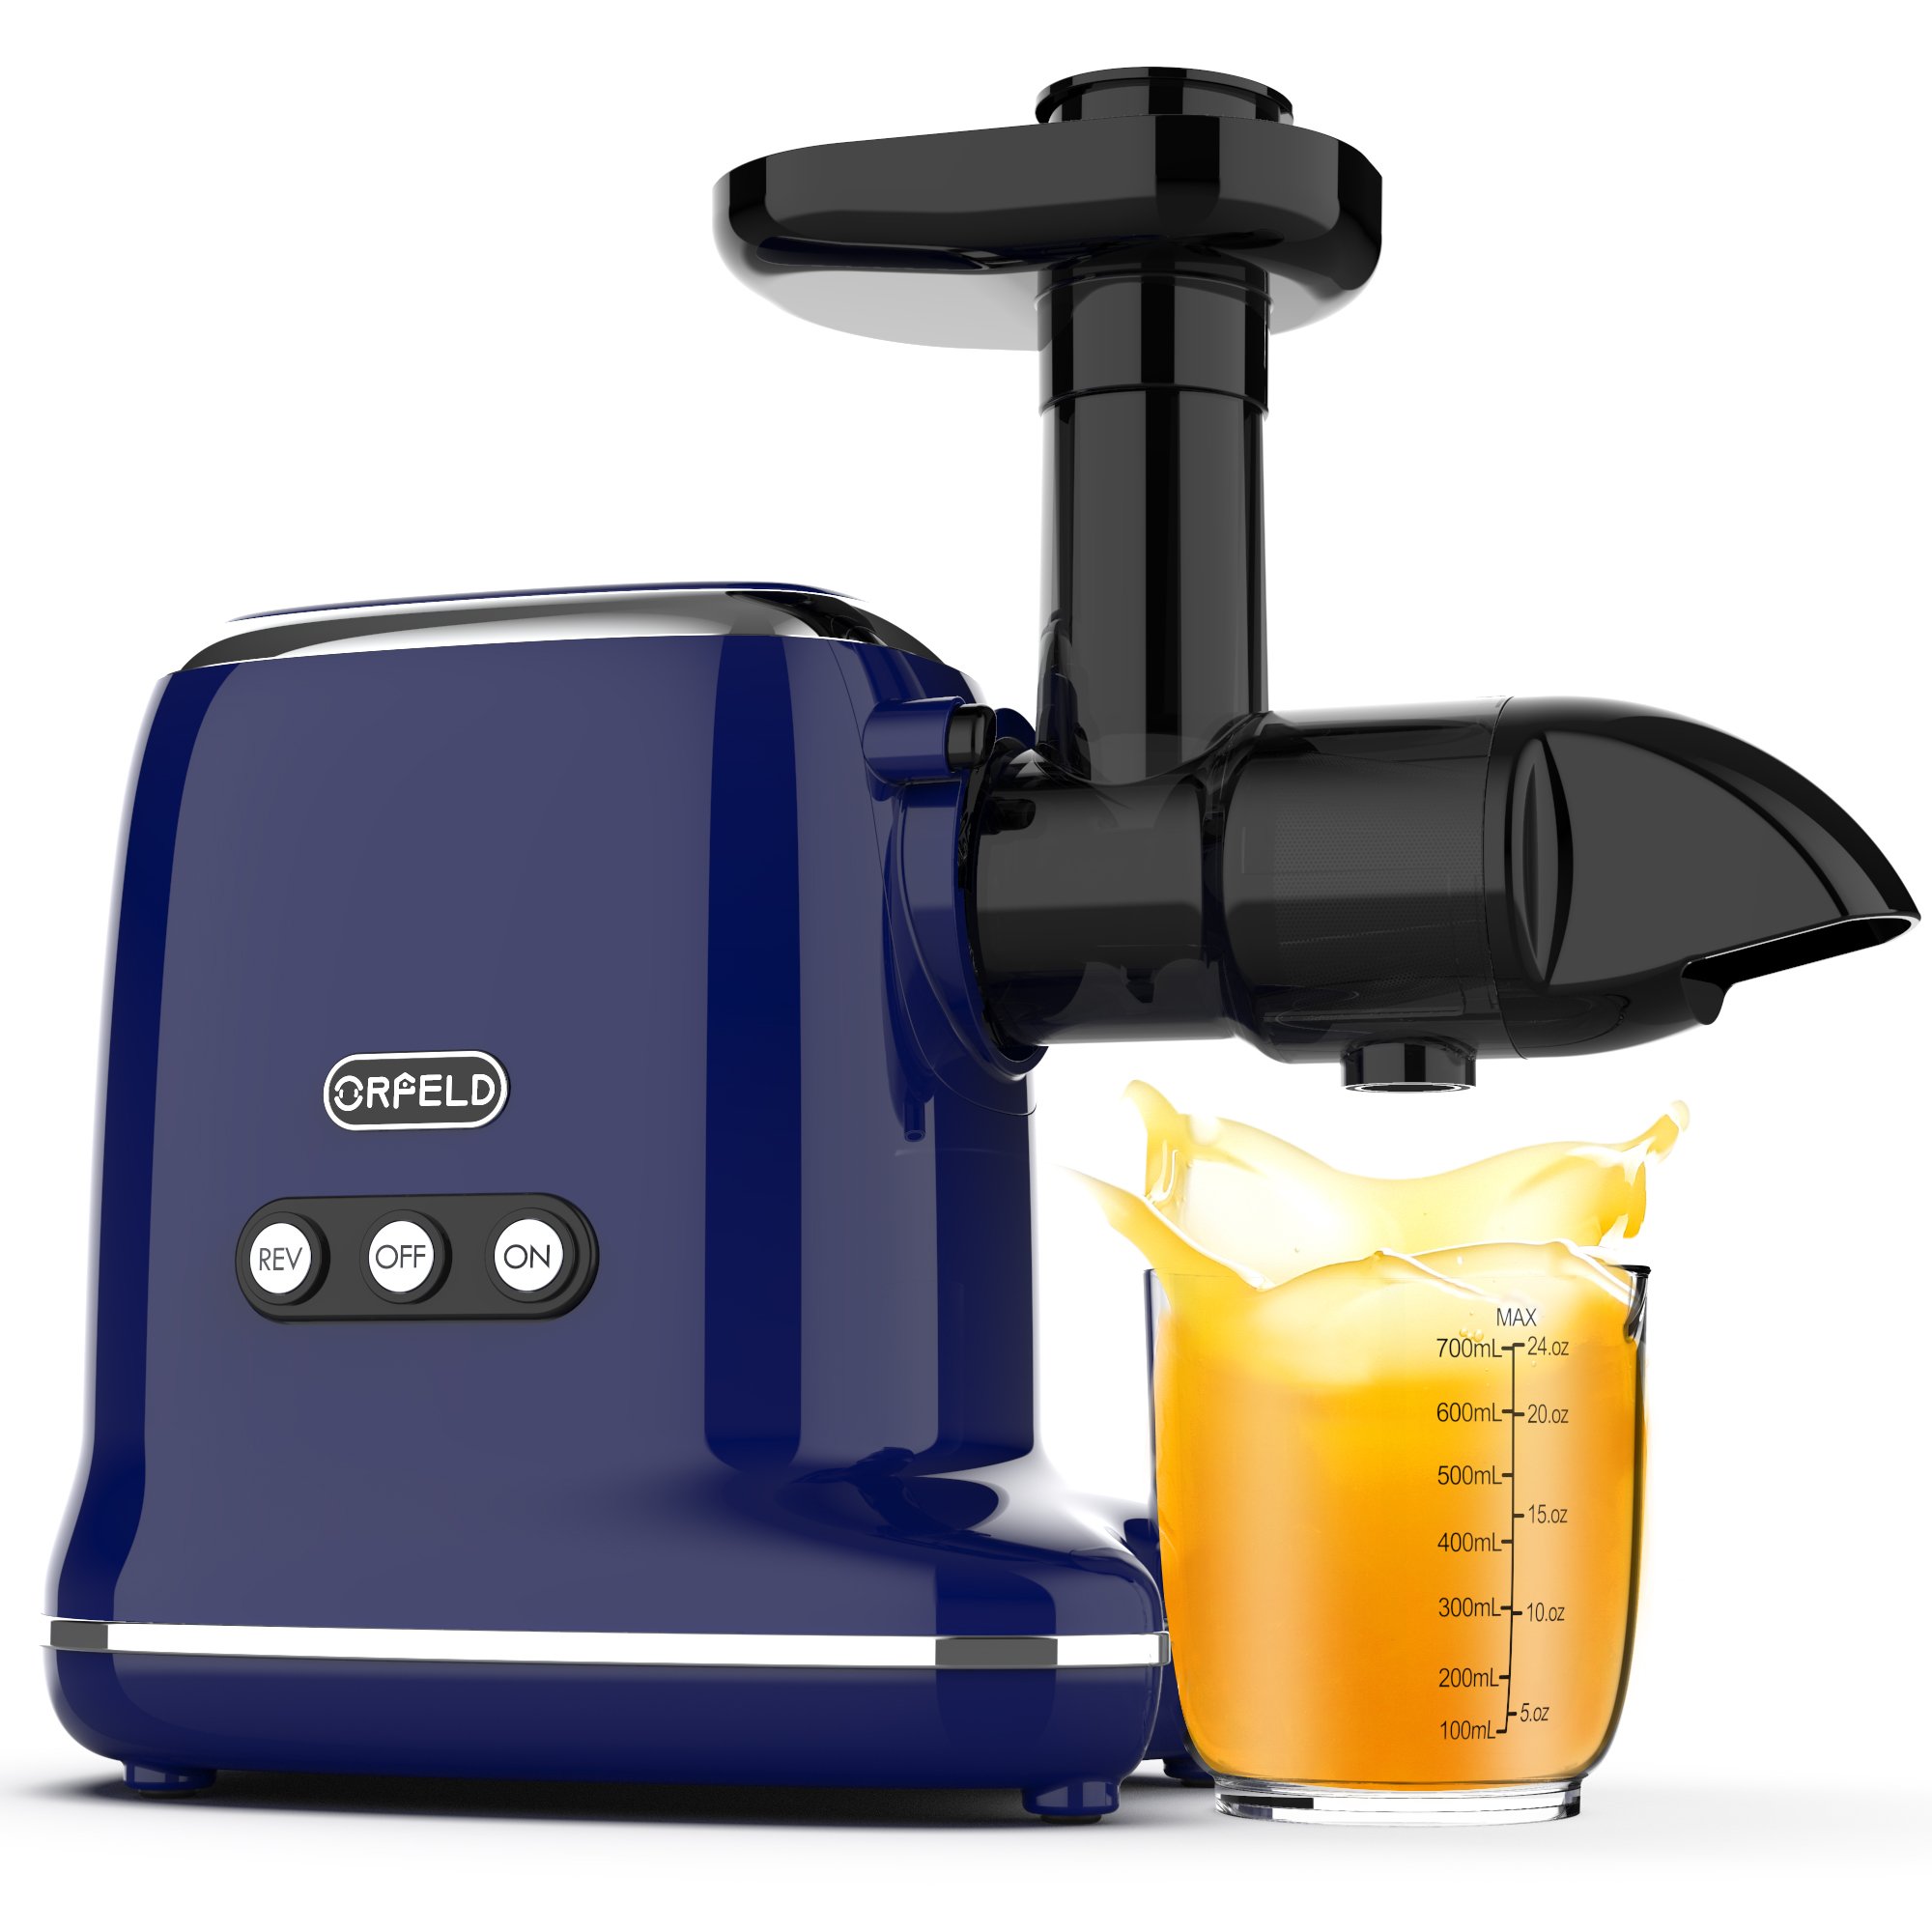 Take $130 off the Orfeld Masticating Juicer